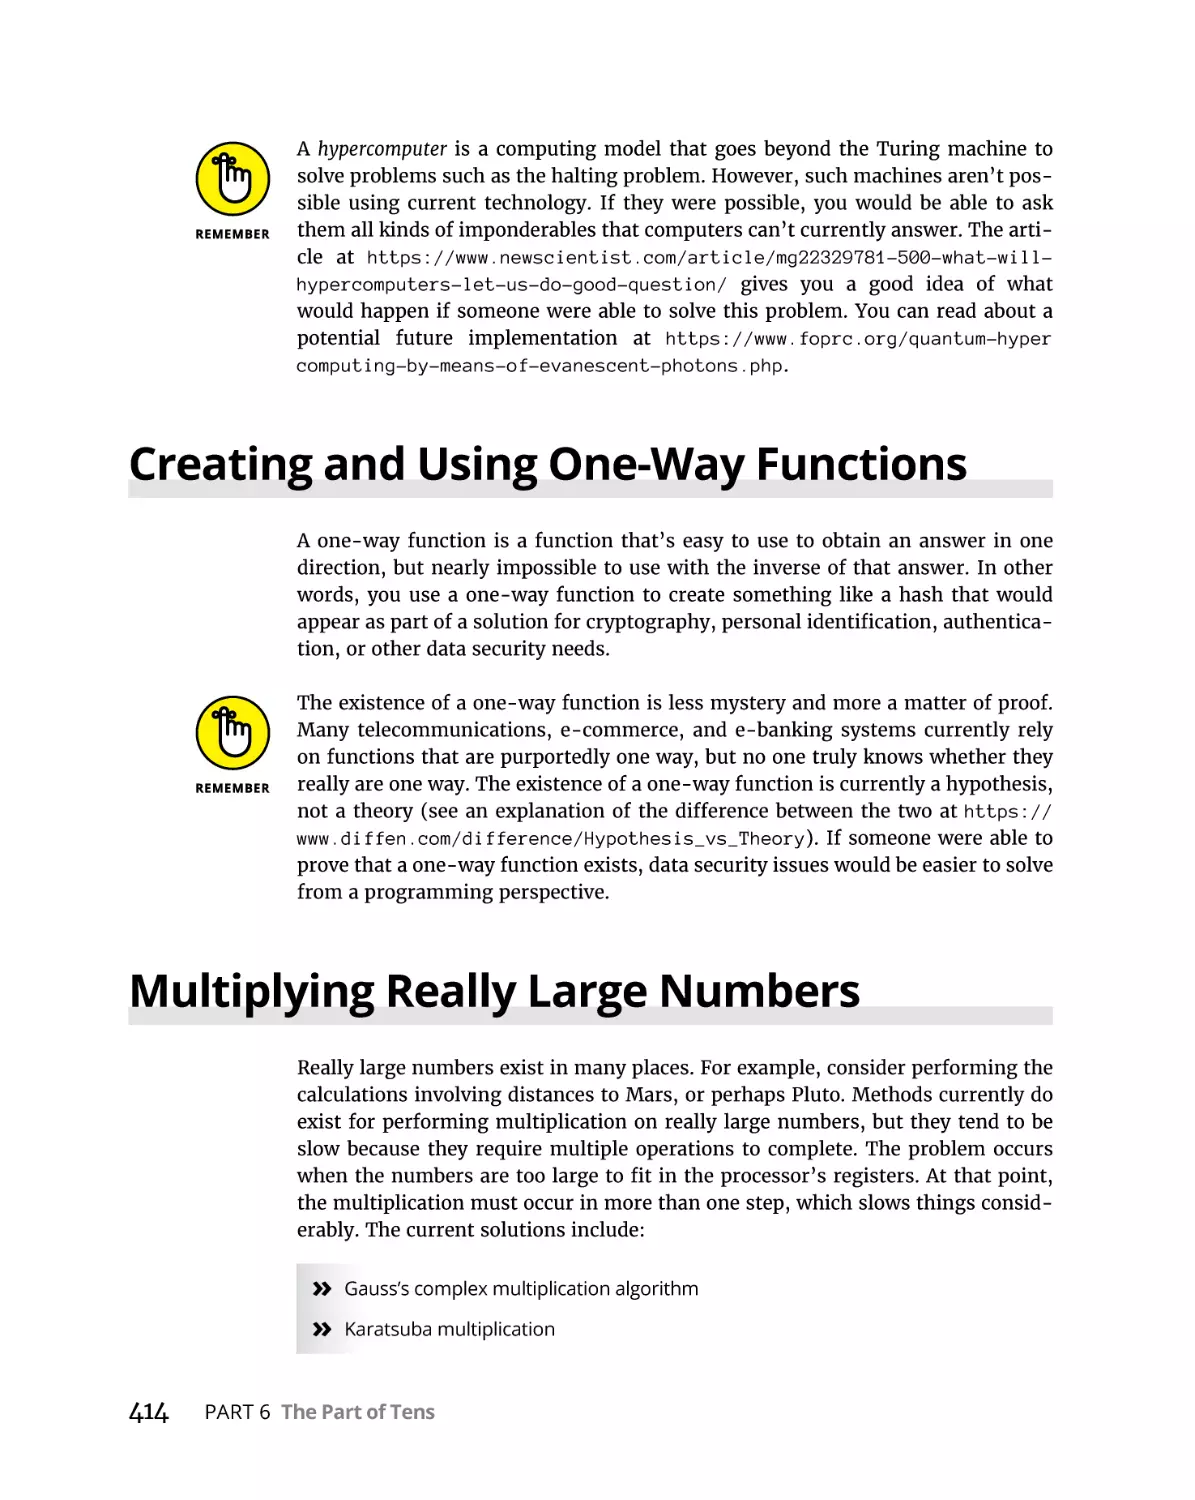 Creating and Using One-Way Functions
Multiplying Really Large Numbers